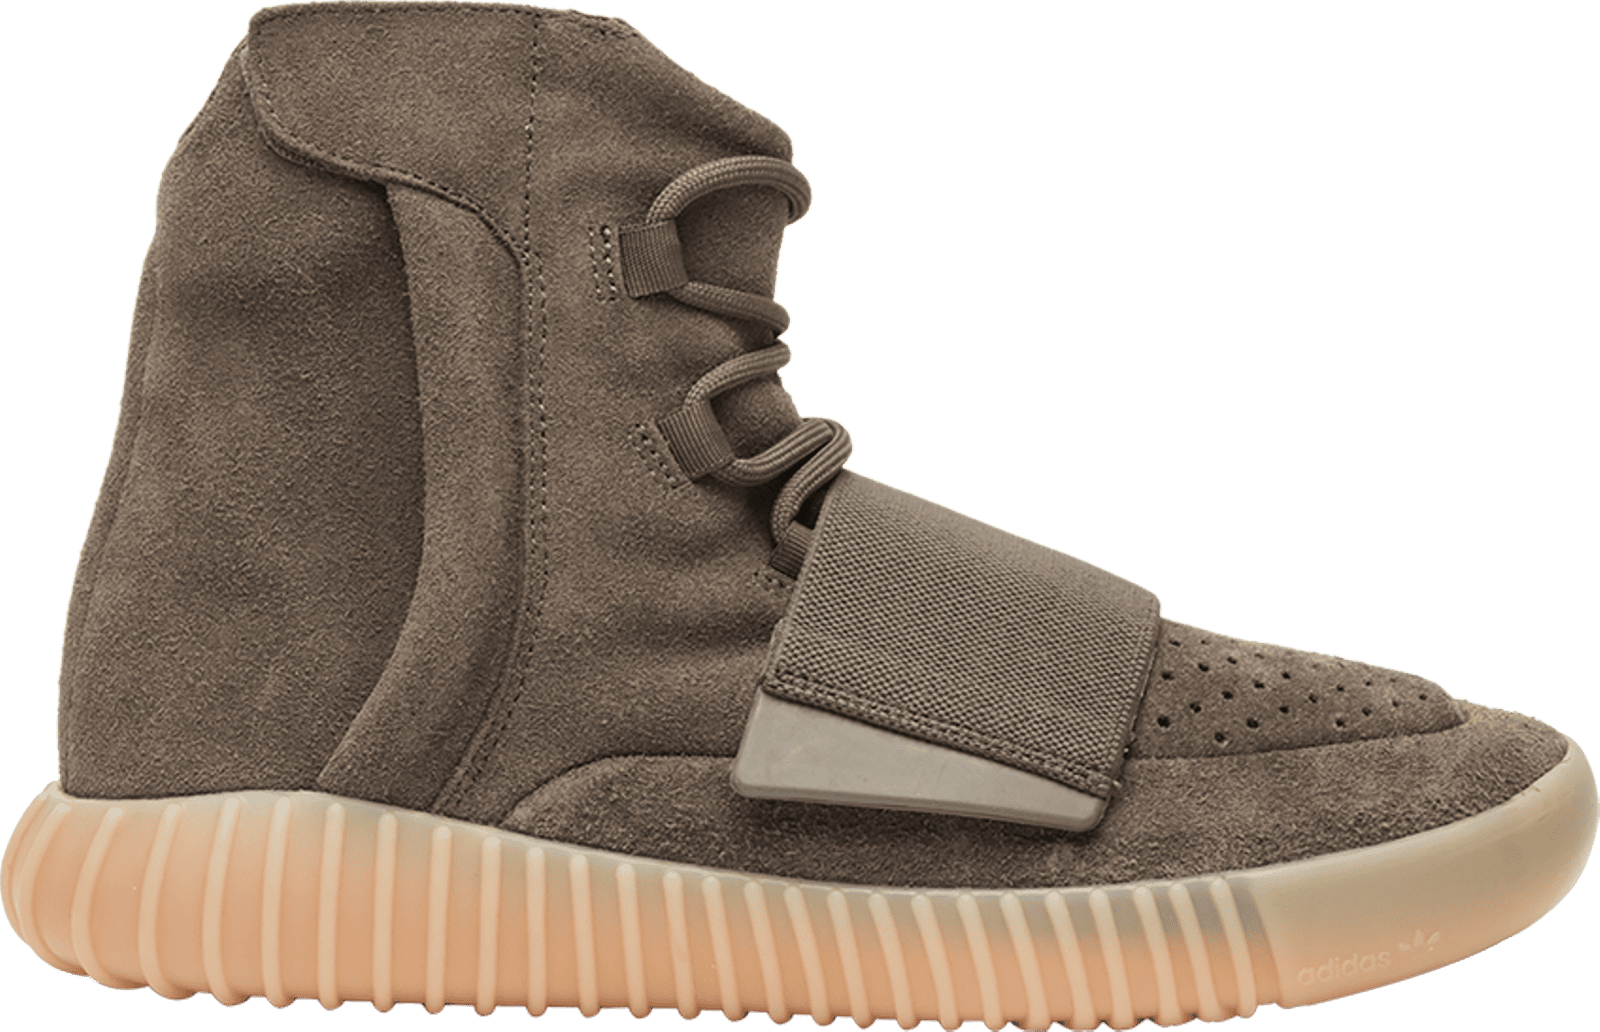 Yeezy 750 Sneakers Models and Style Descriptions | eBay